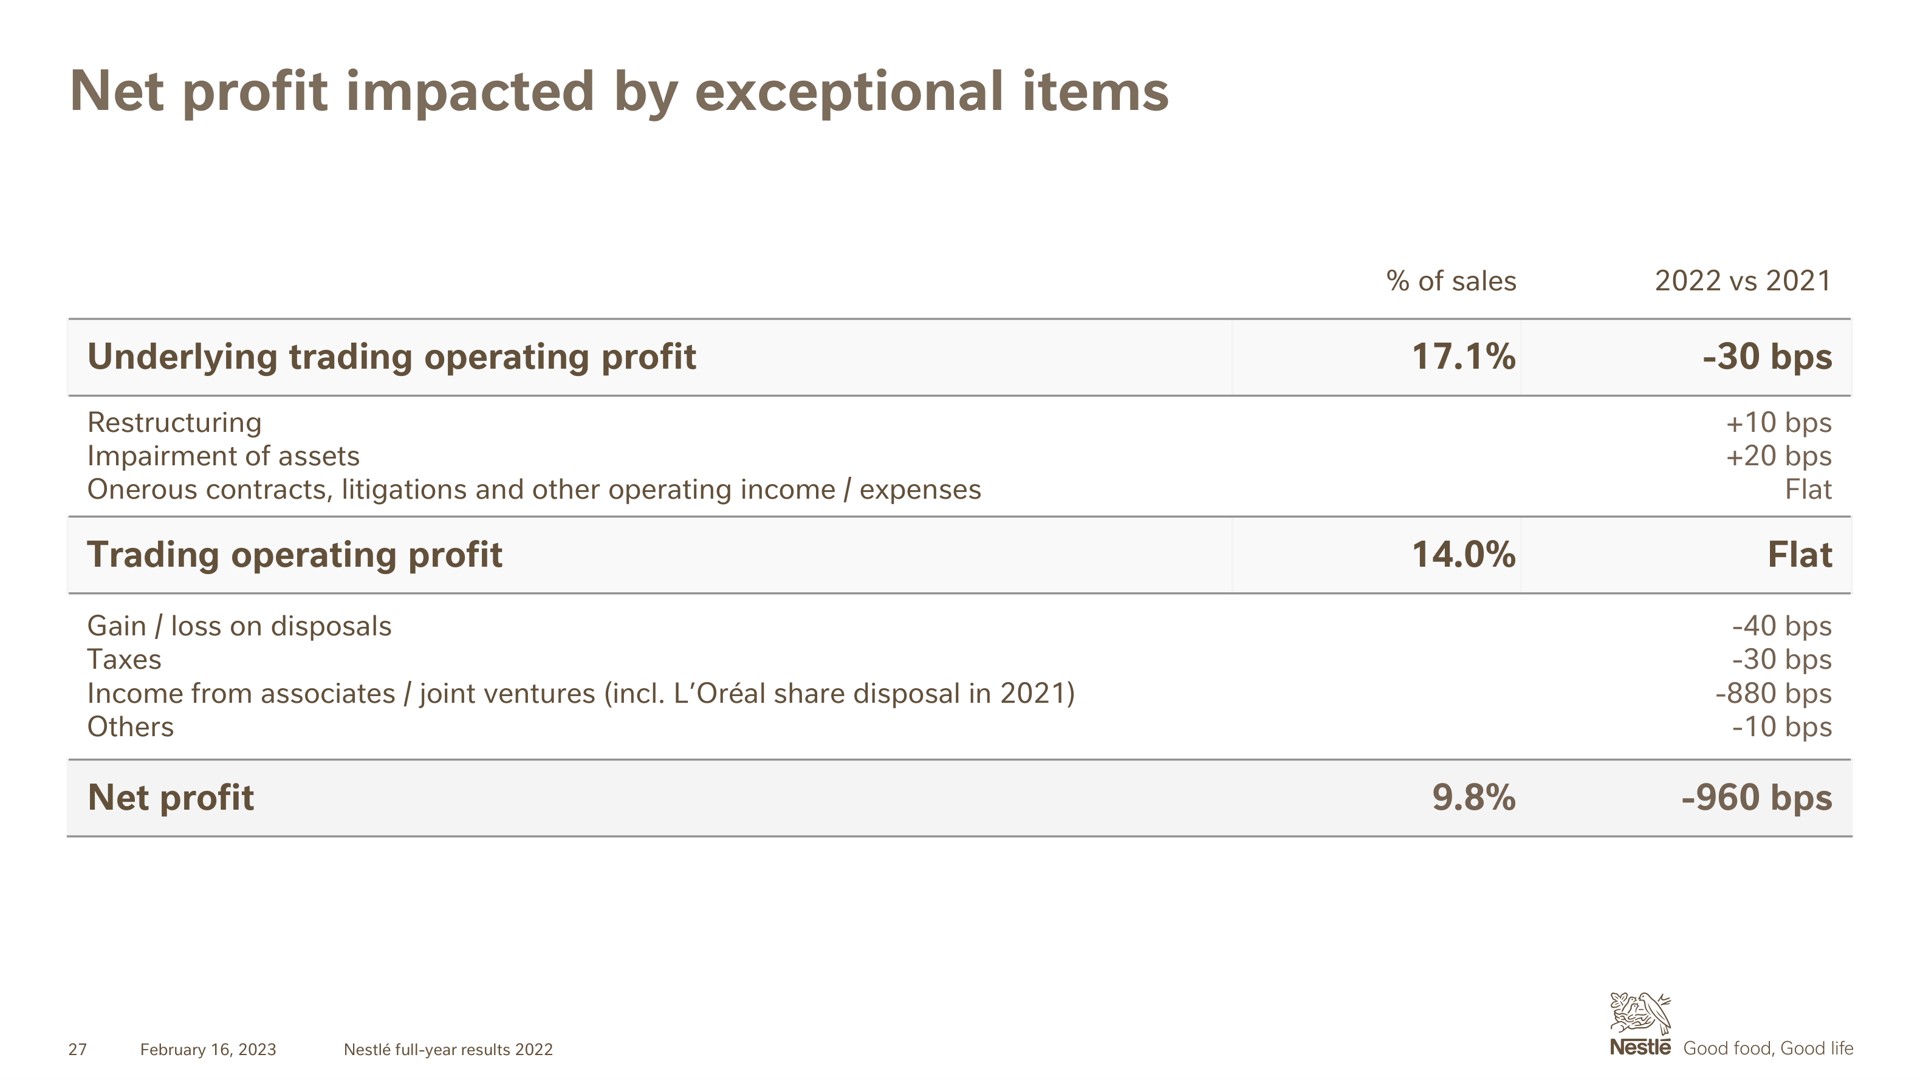 net profit impacted by exceptional items | Nestle